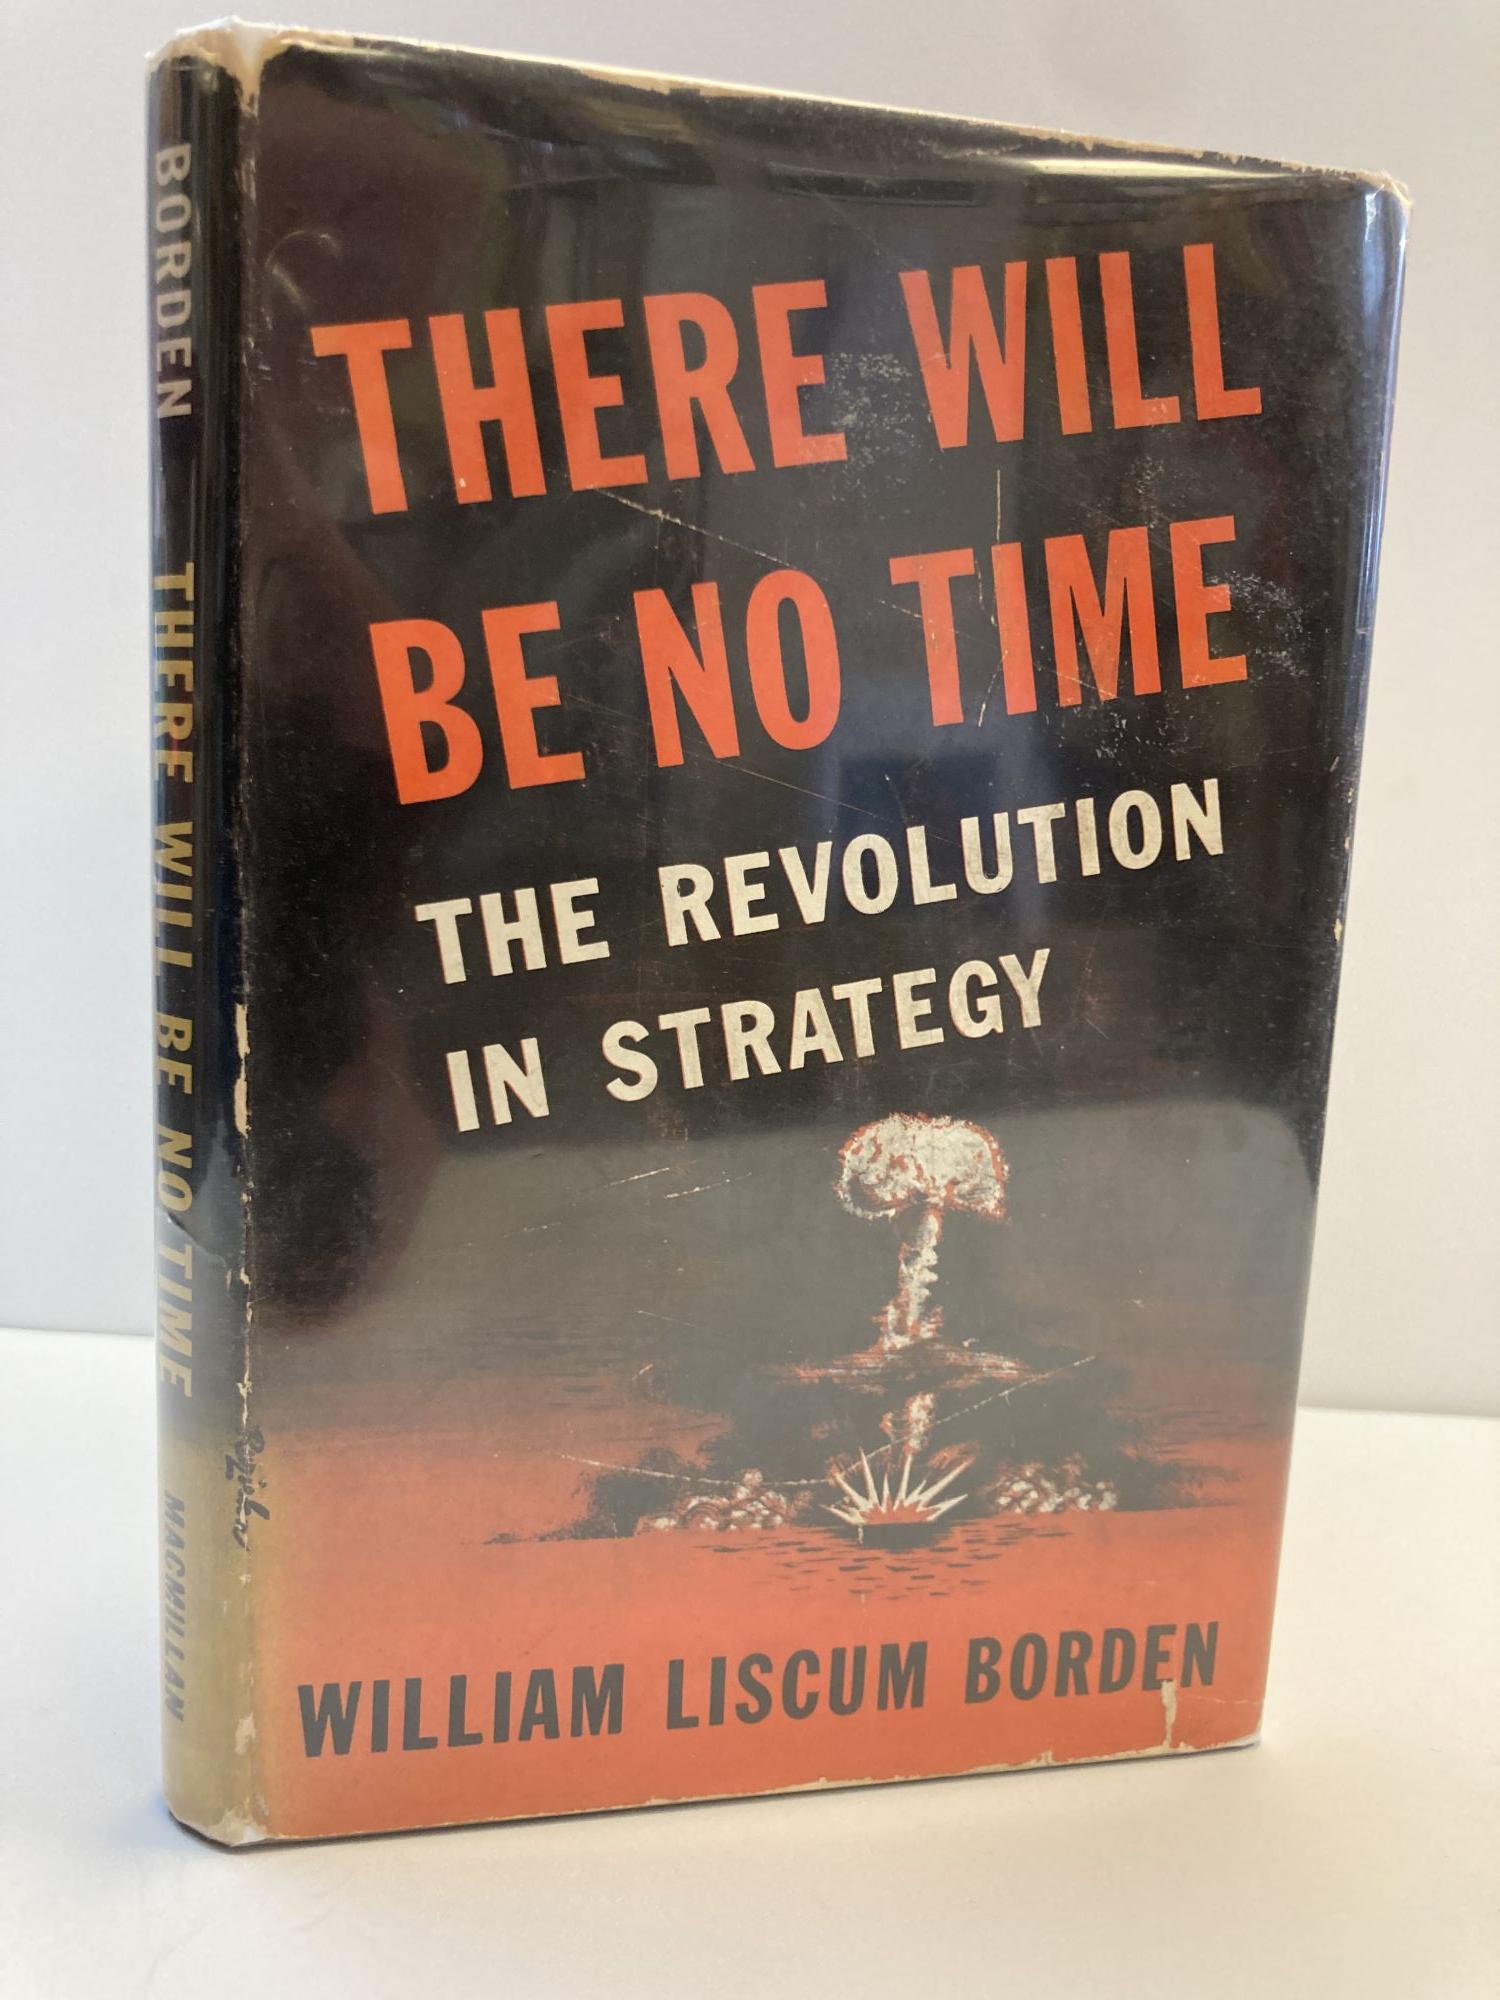 1357454 THERE WILL BE NO TIME - THE REVOLUTION IN STRATEGY. William Liscum Borden.